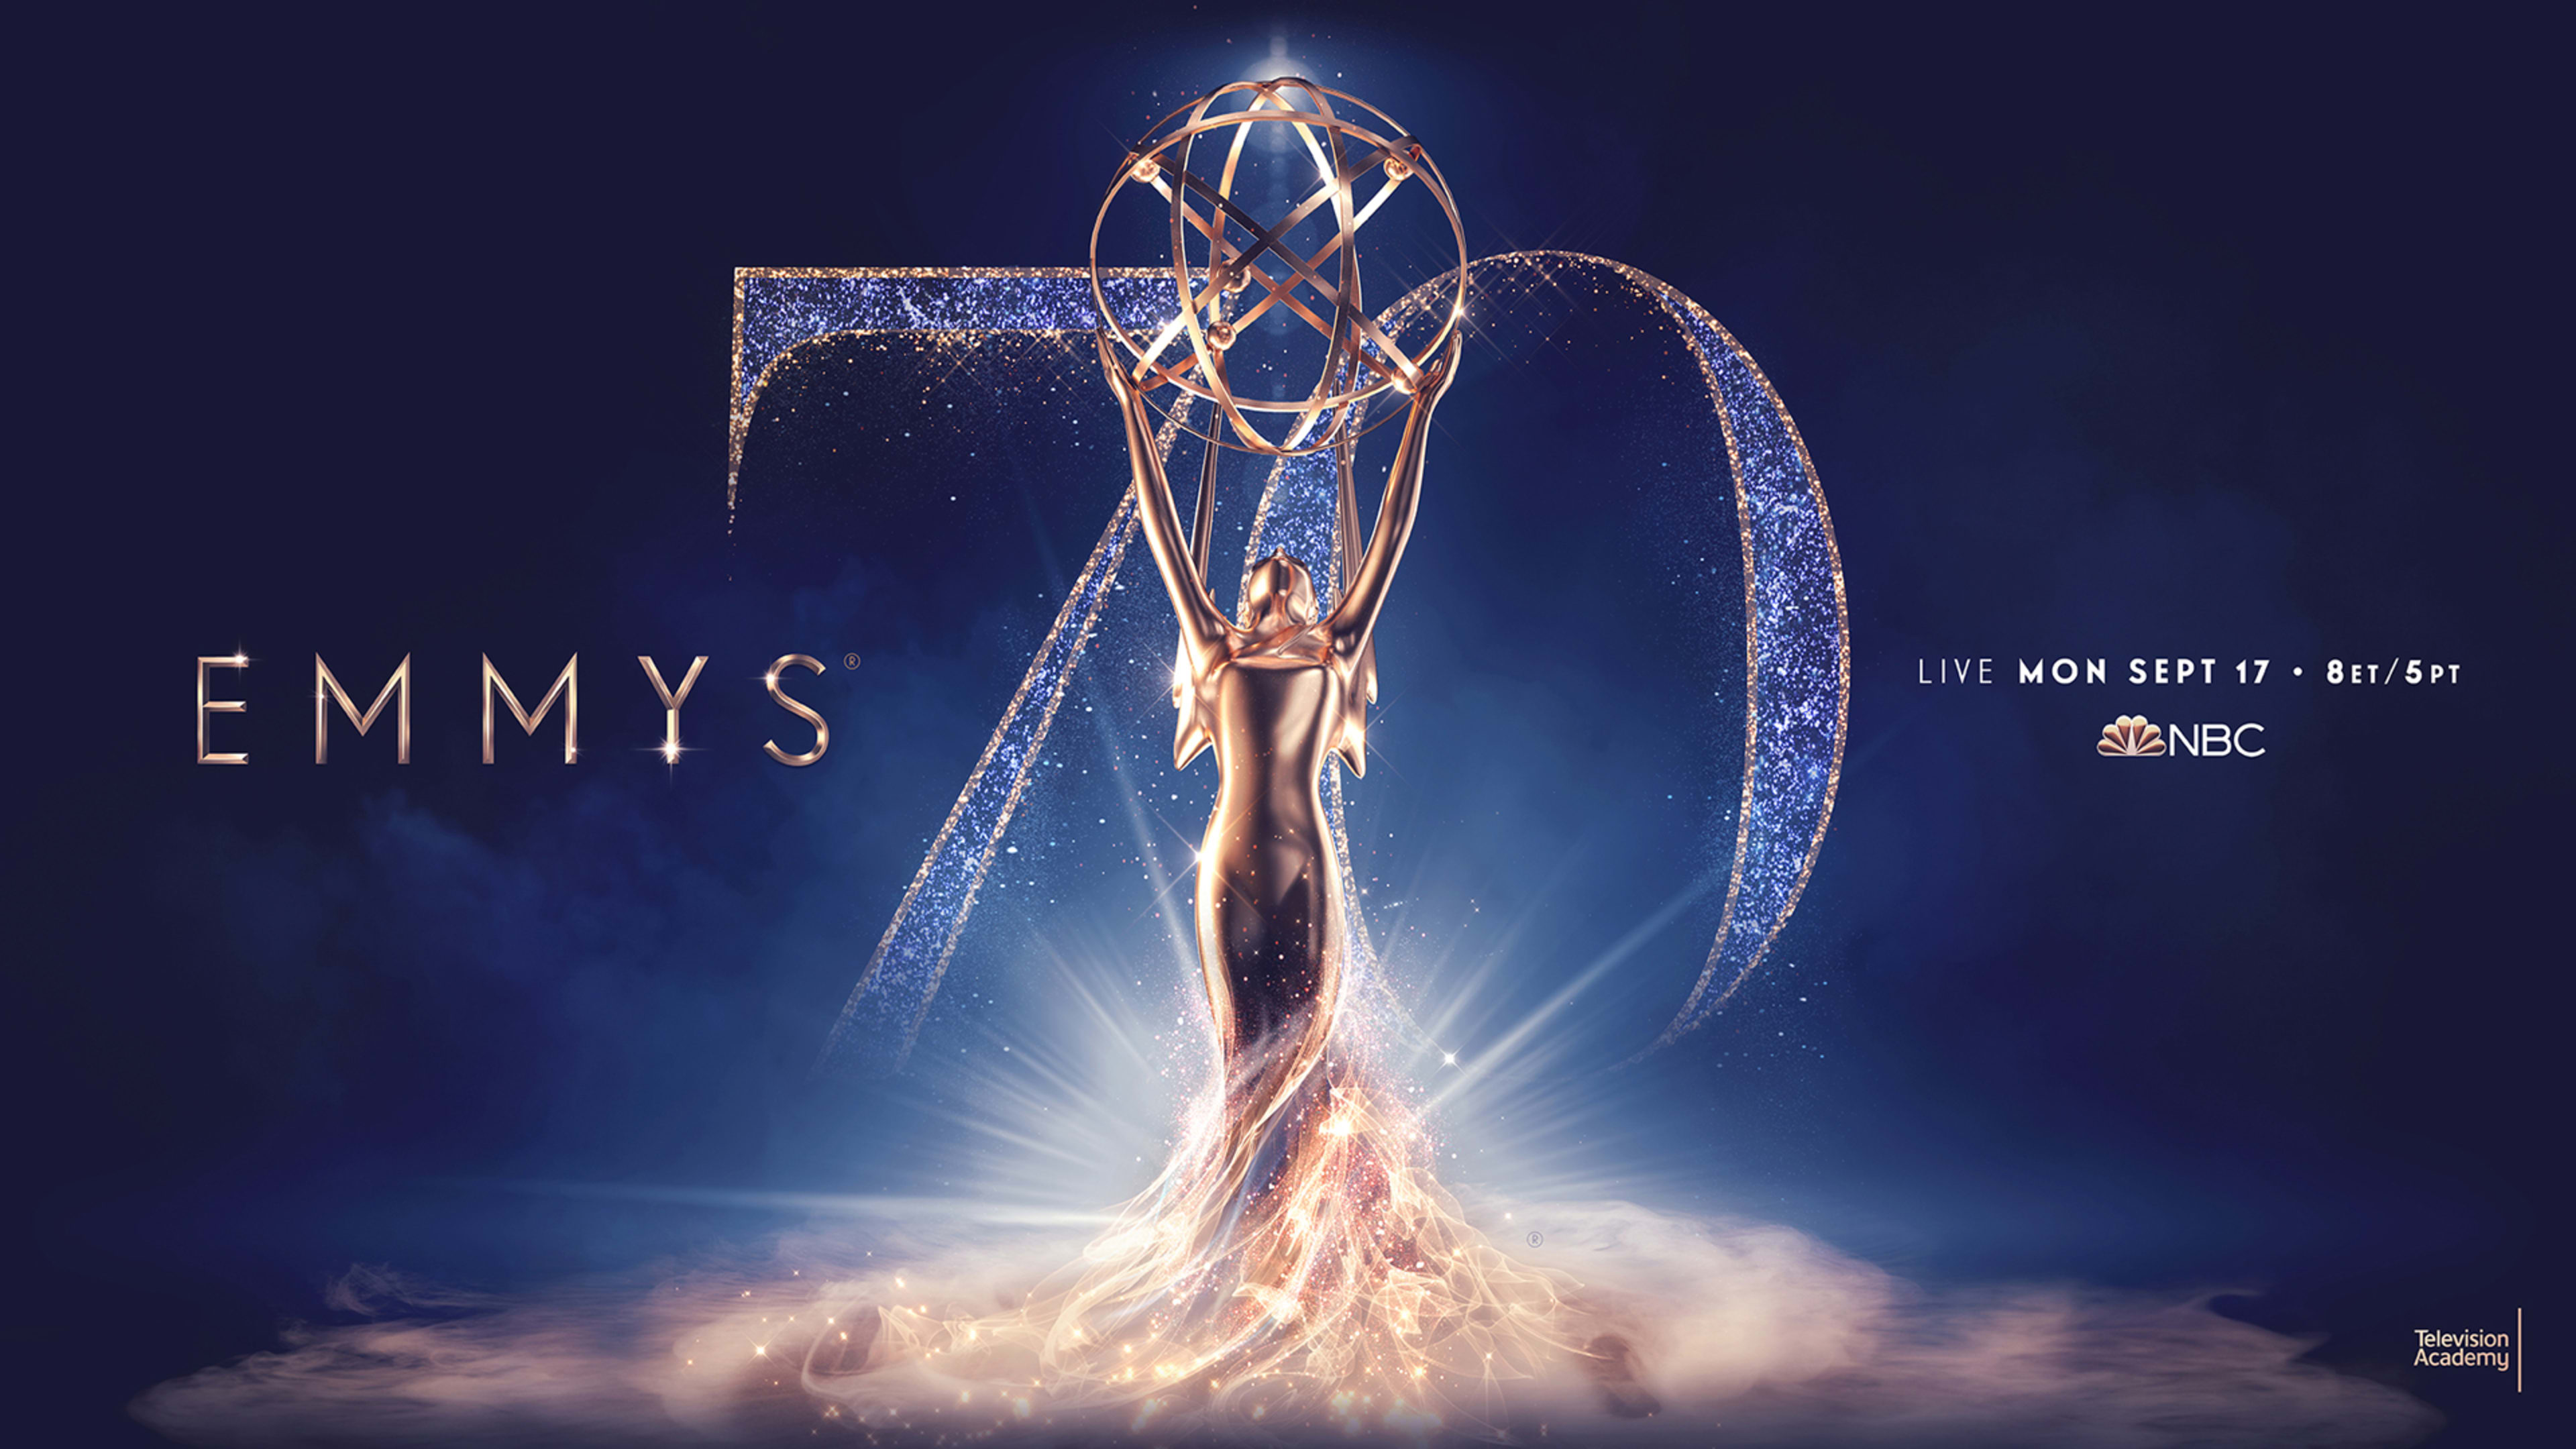 Emmy Awards 2018: Here’s a list of the winners and nominees